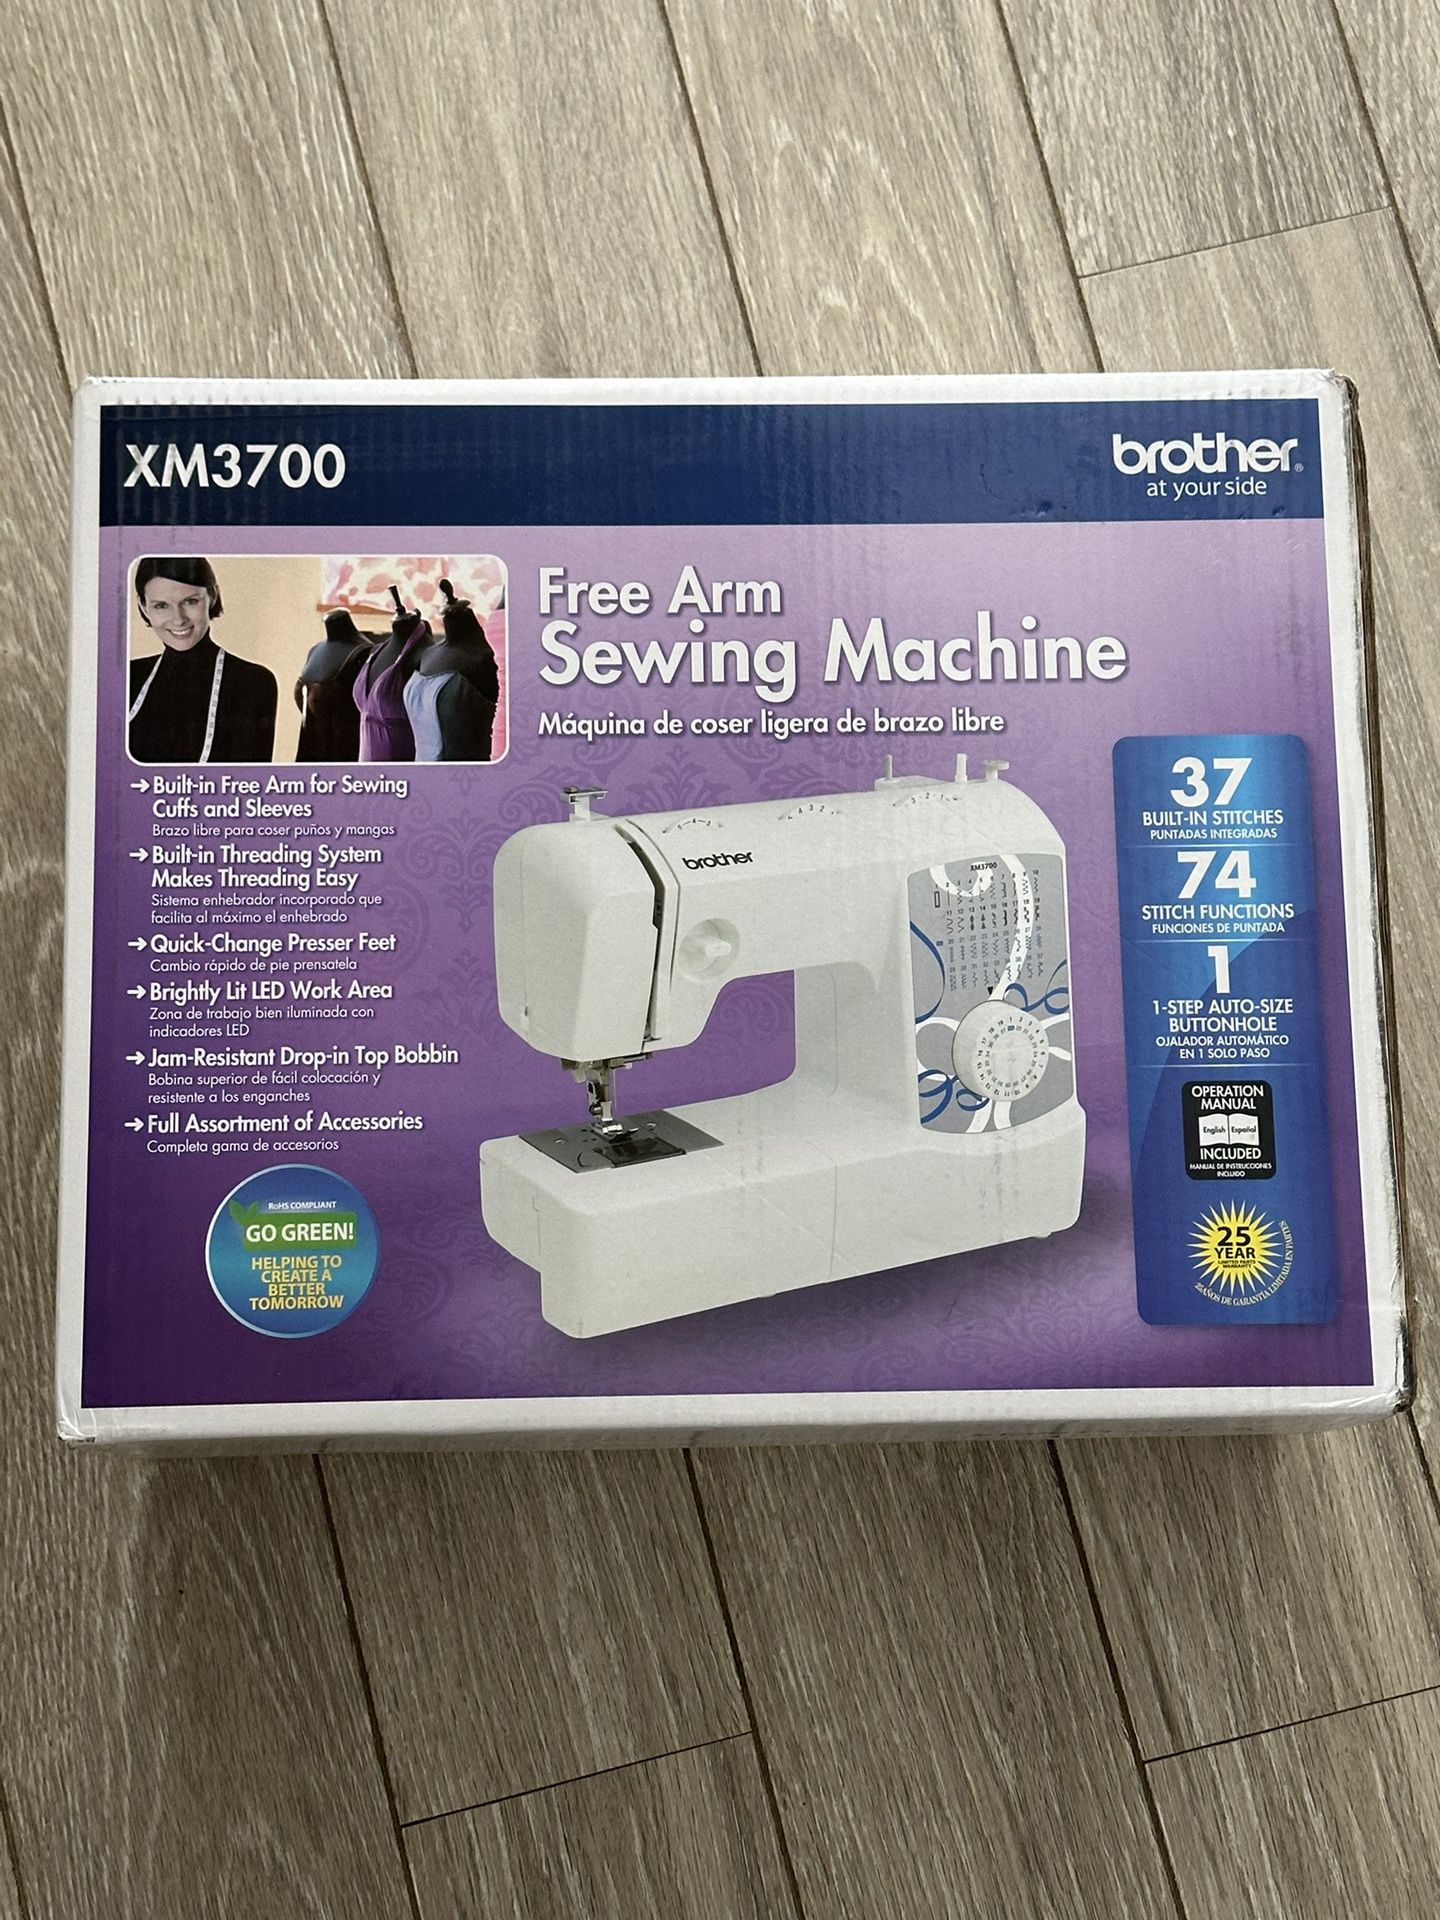 Brother XM3700 Free Arm Sewing Machine